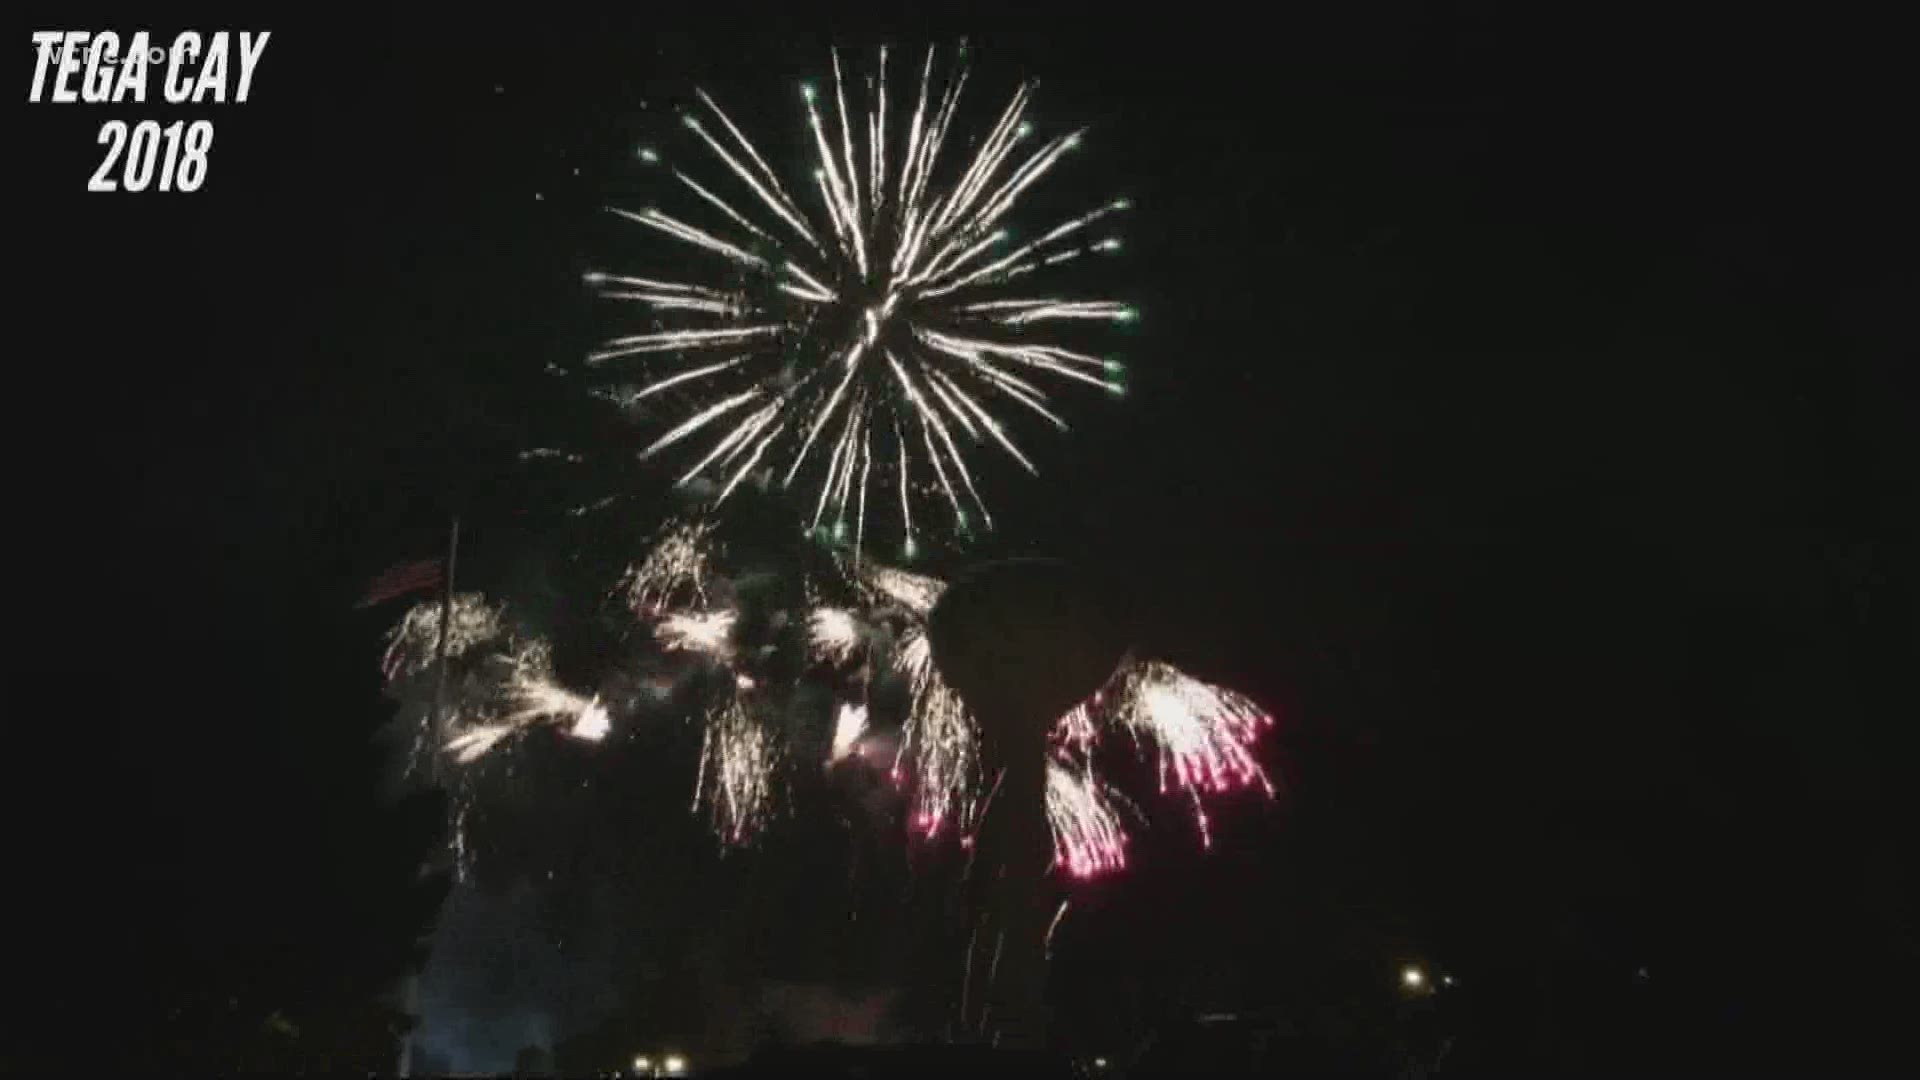 The COVID-19 pandemic has forced the cancellation of nearly all Fourth of July celebrations in the Carolinas as officials work to protect communities from the virus.